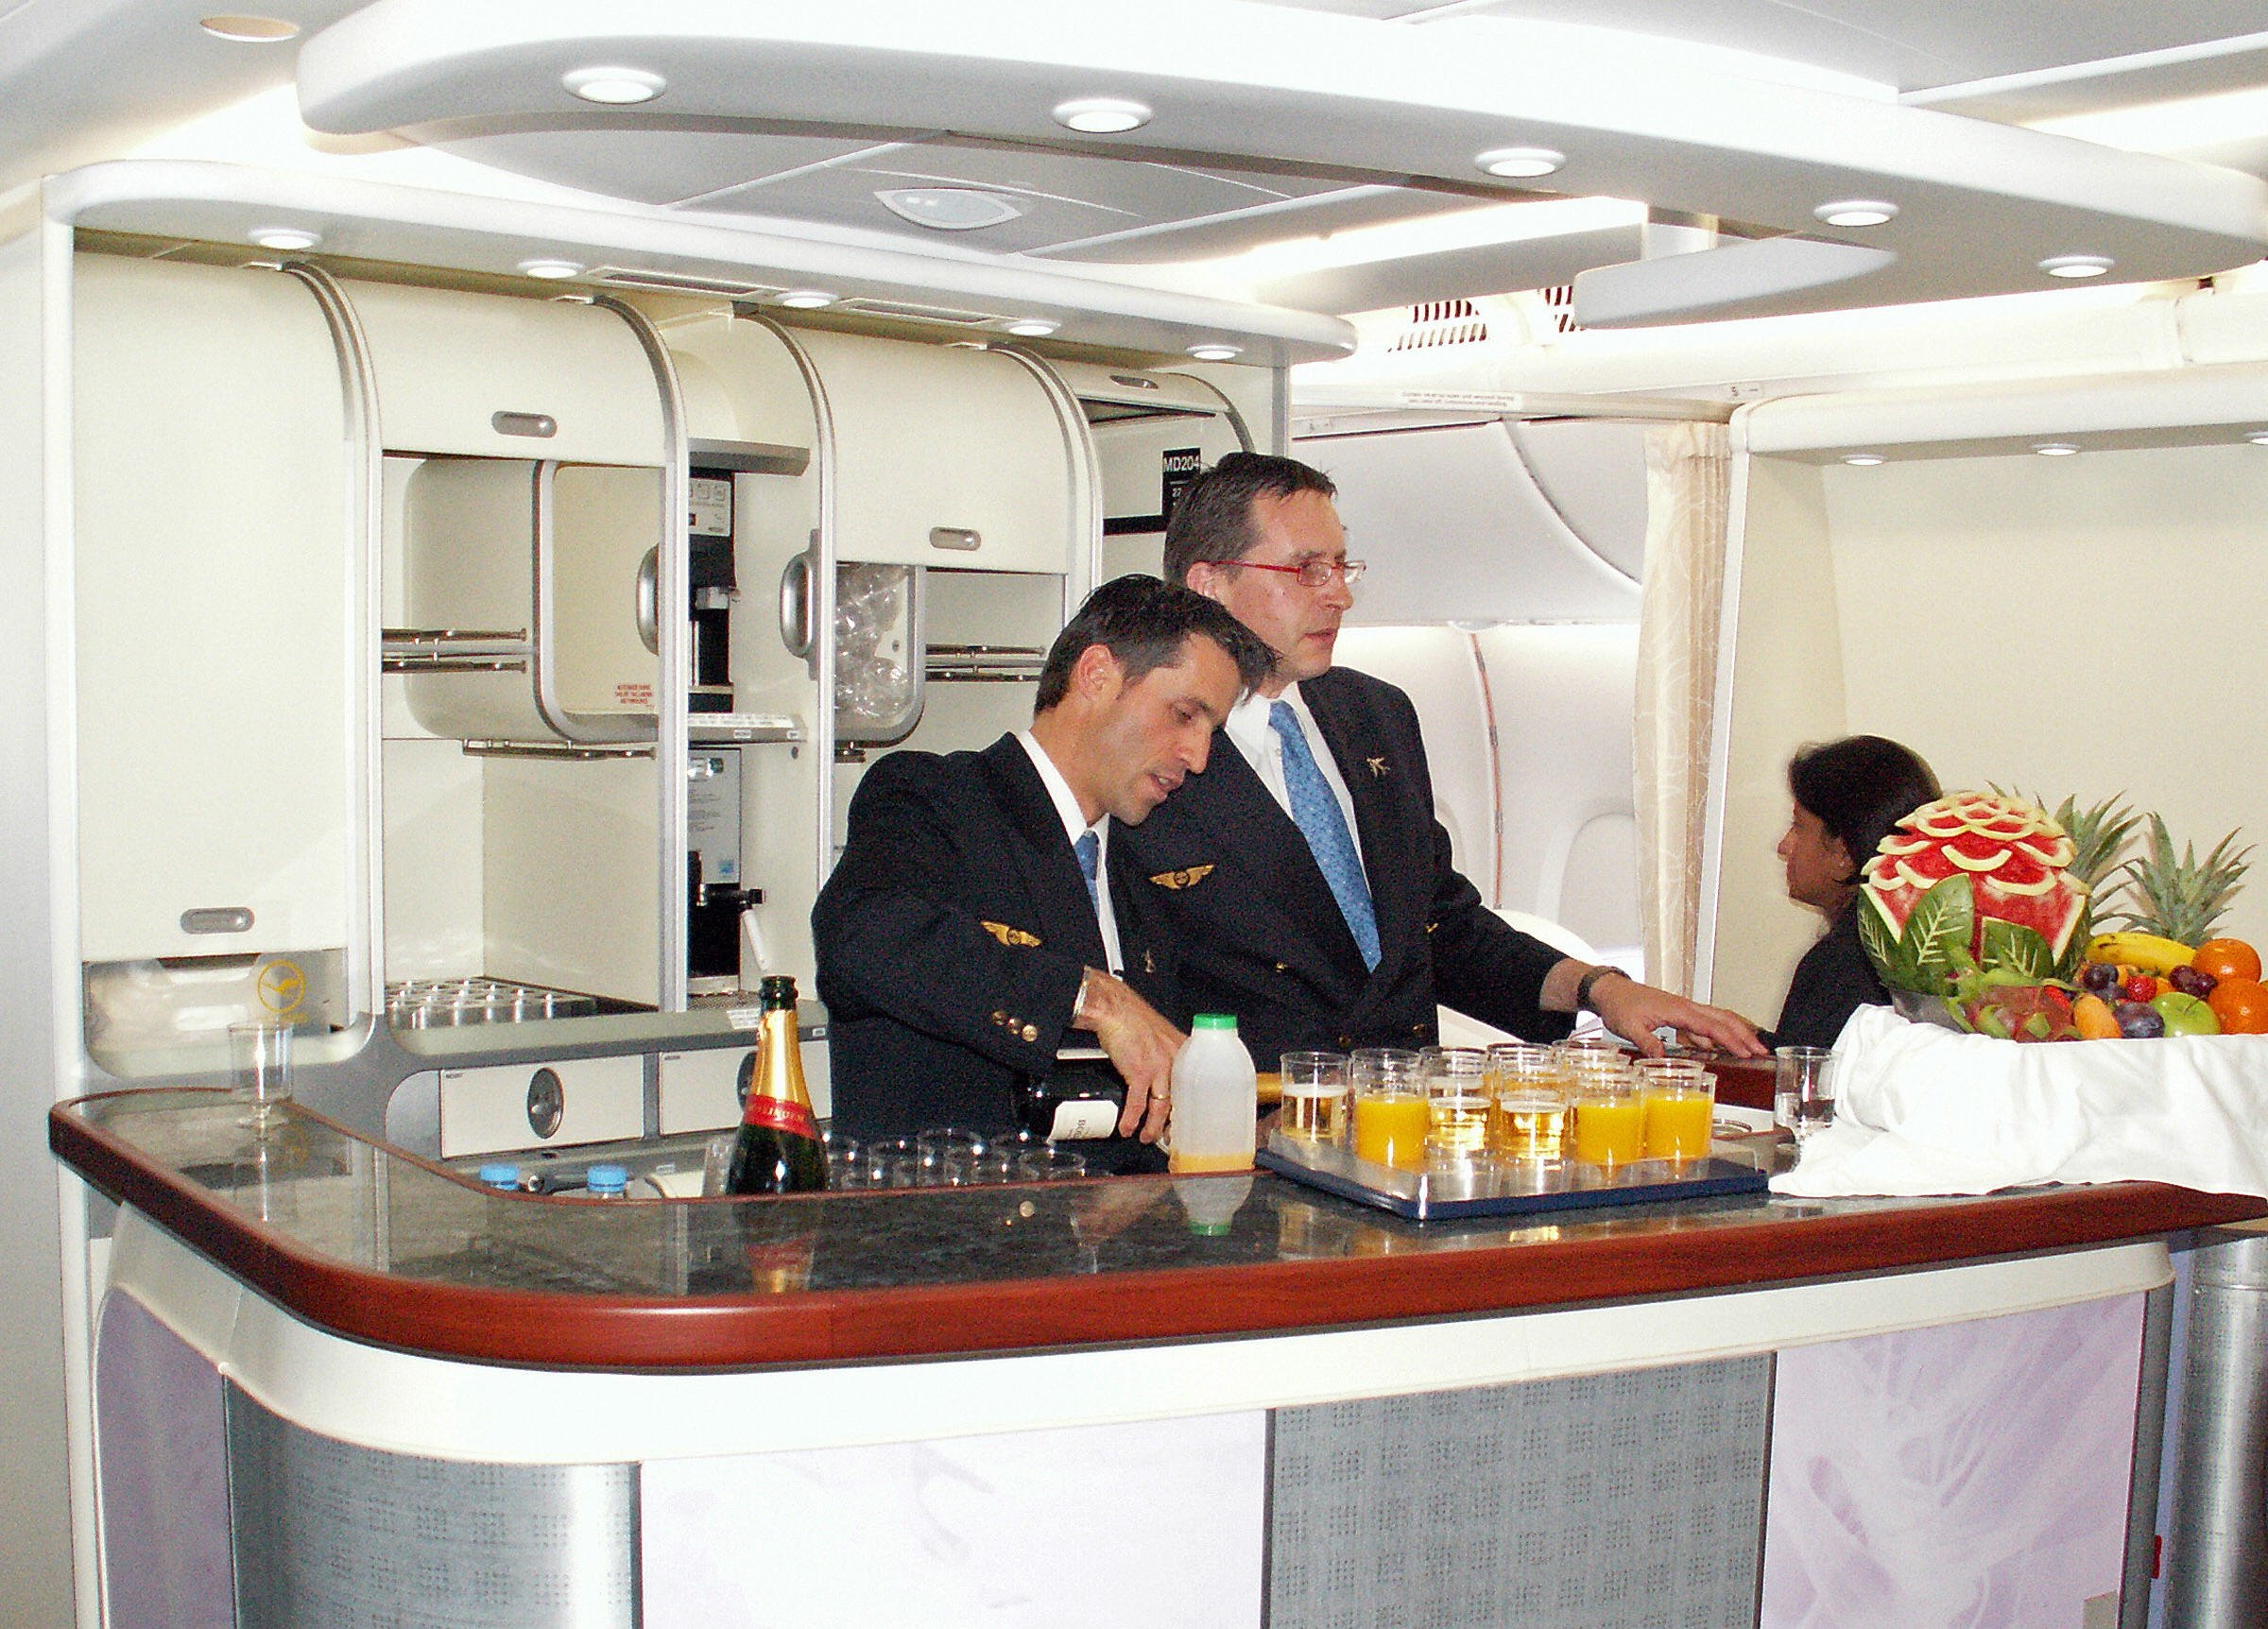 Stewards prepare drinks in the first class bar of Lufthansa aircraft.